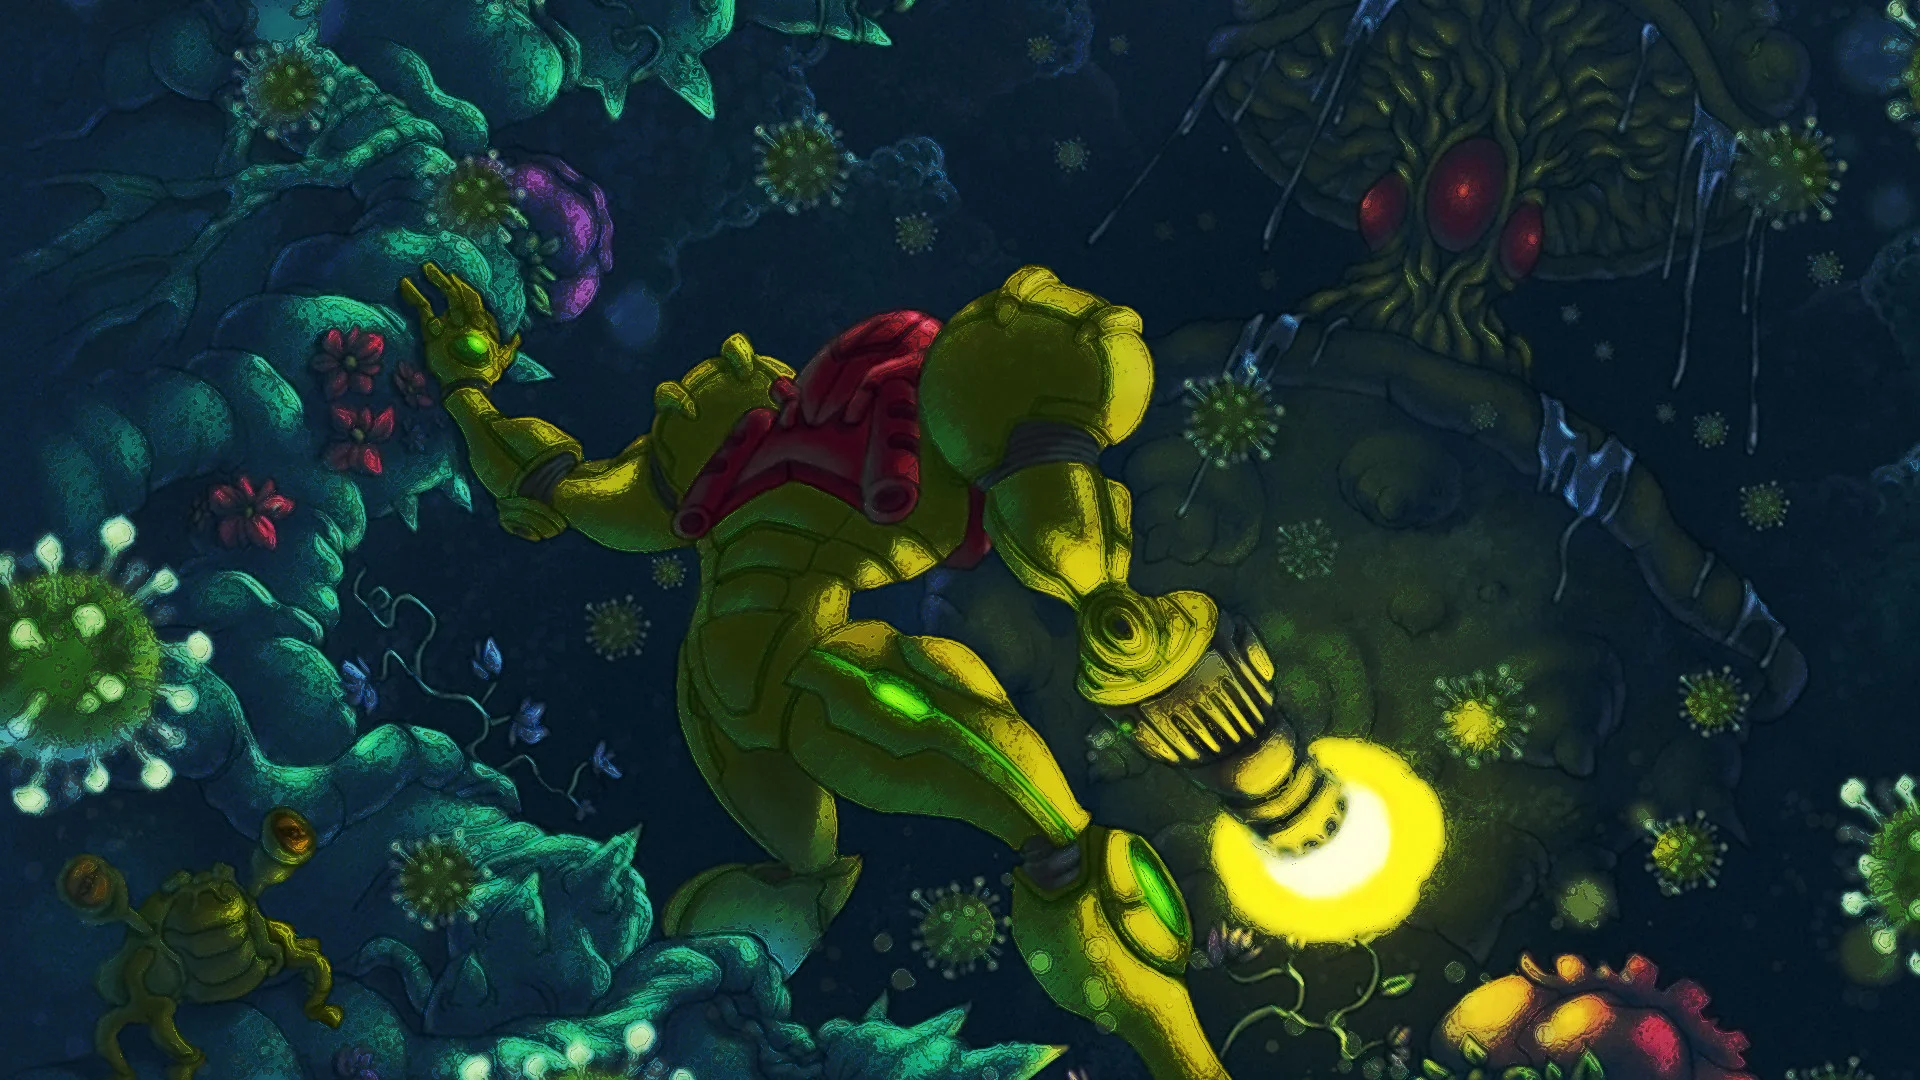 HD Wallpaper Background ID271815. Video Game Metroid